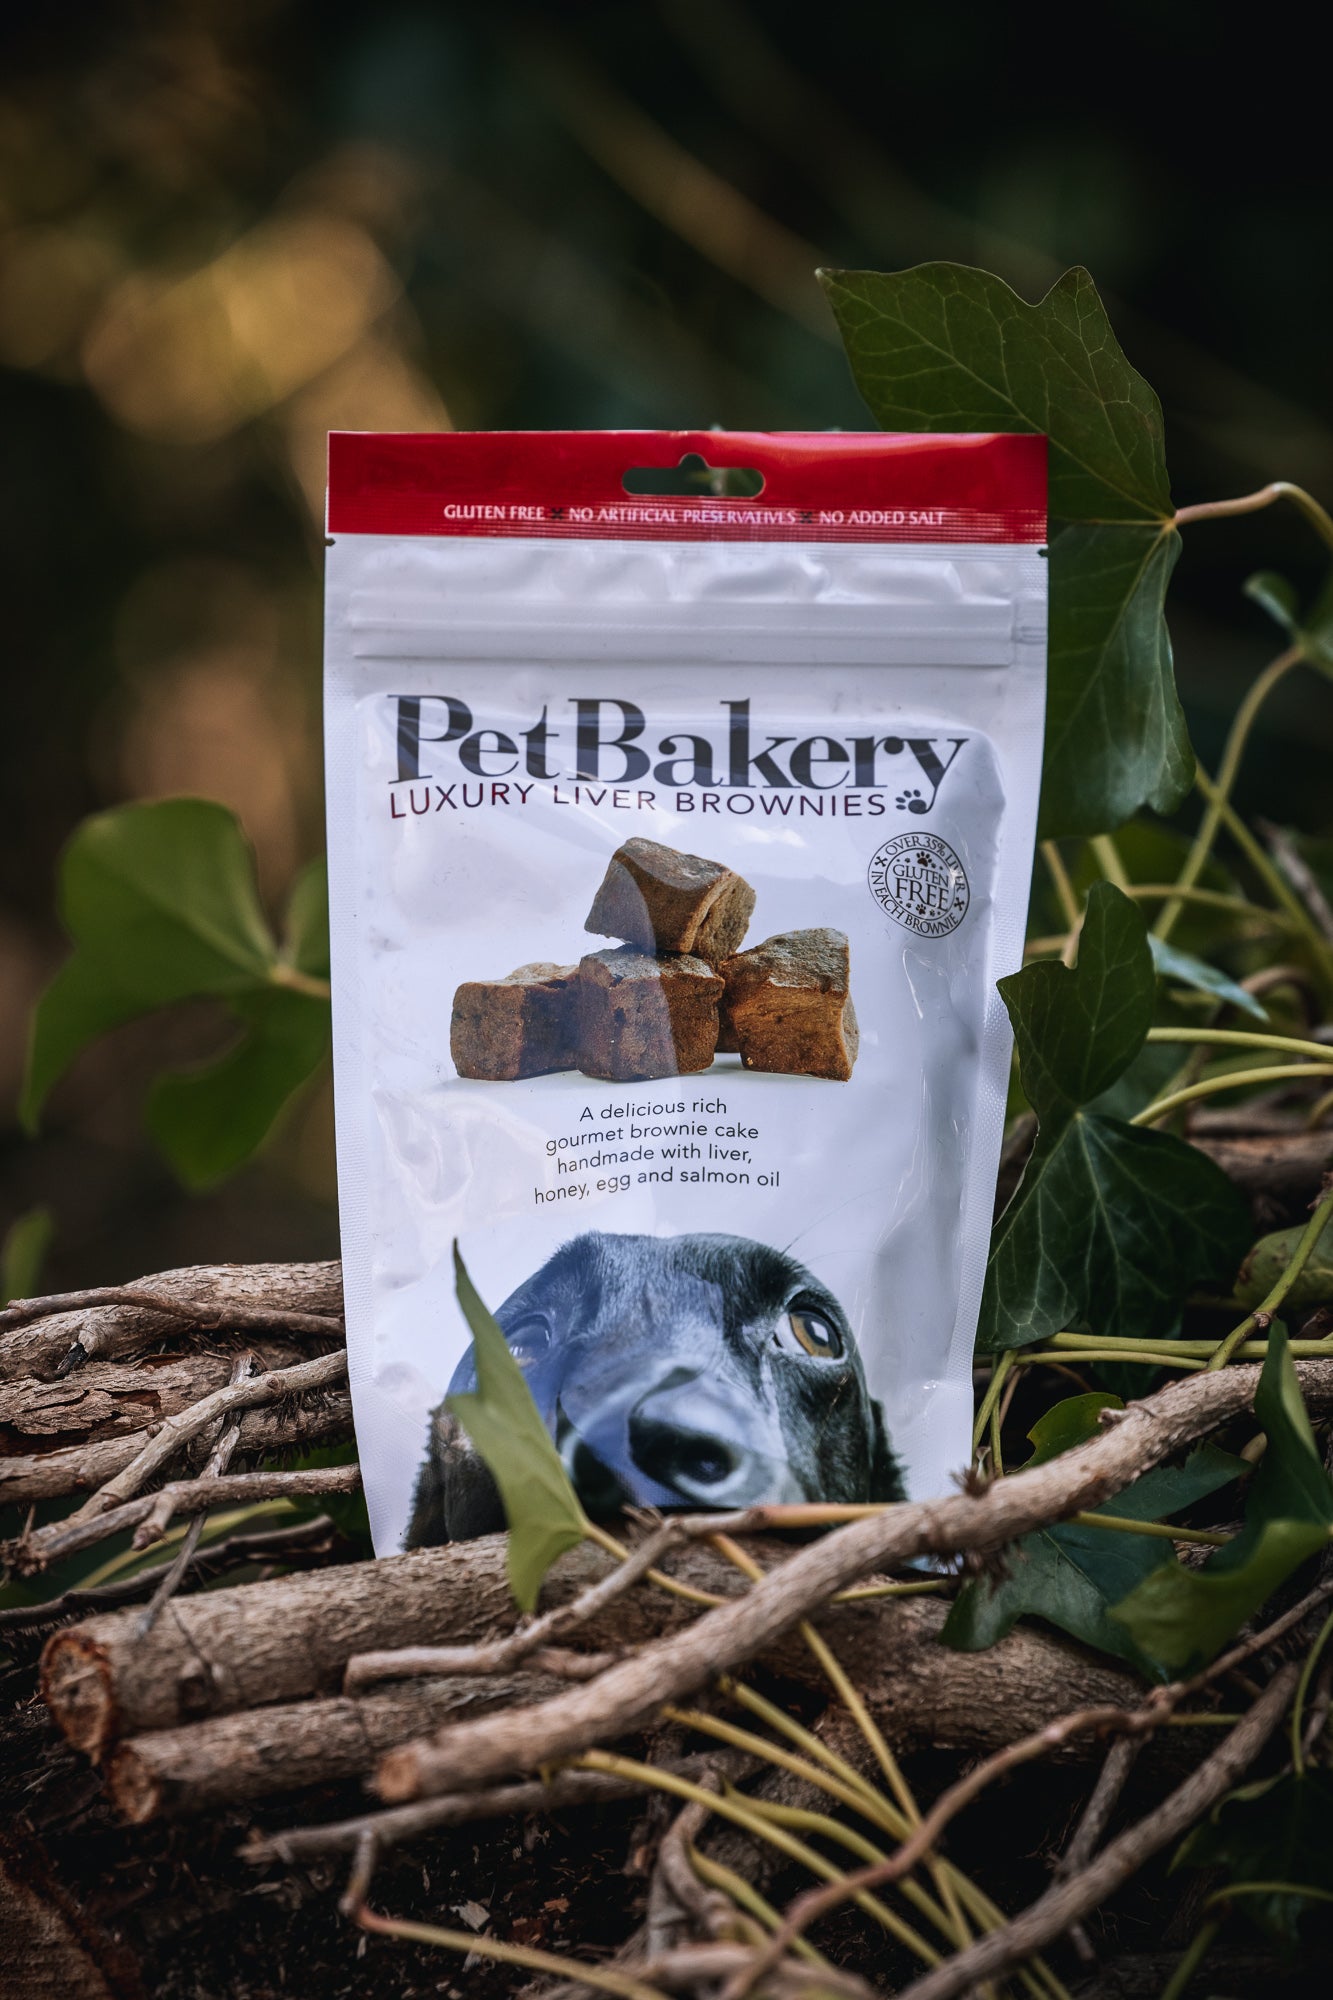 The Pet Bakery Luxury Liver Brownies